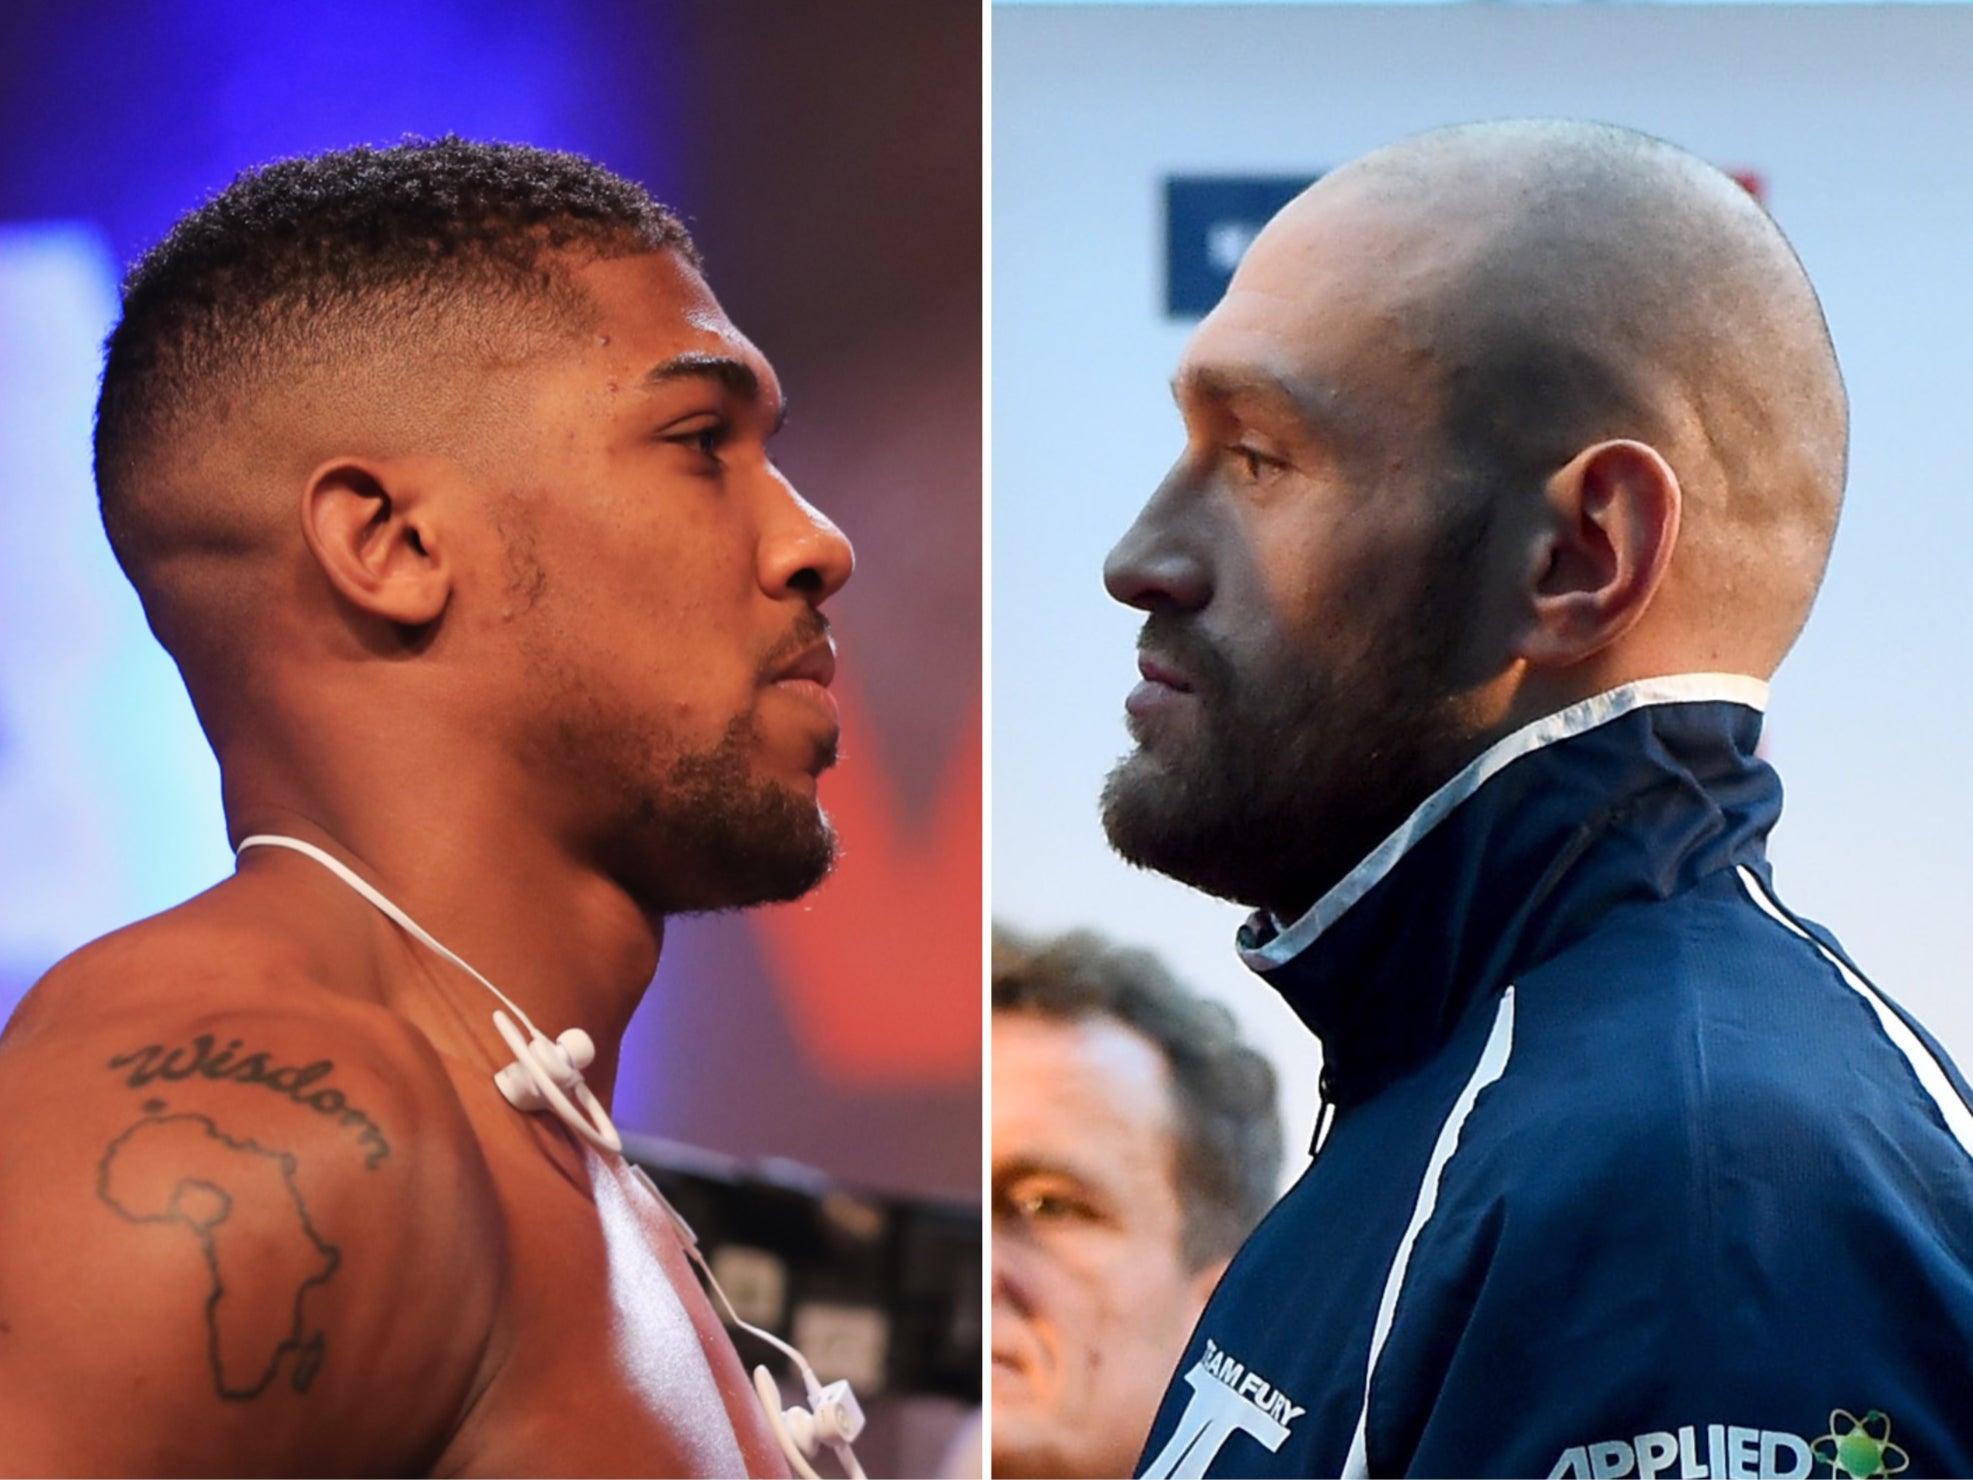 Why did Anthony Joshua lose to such a fat boxer? - Quora